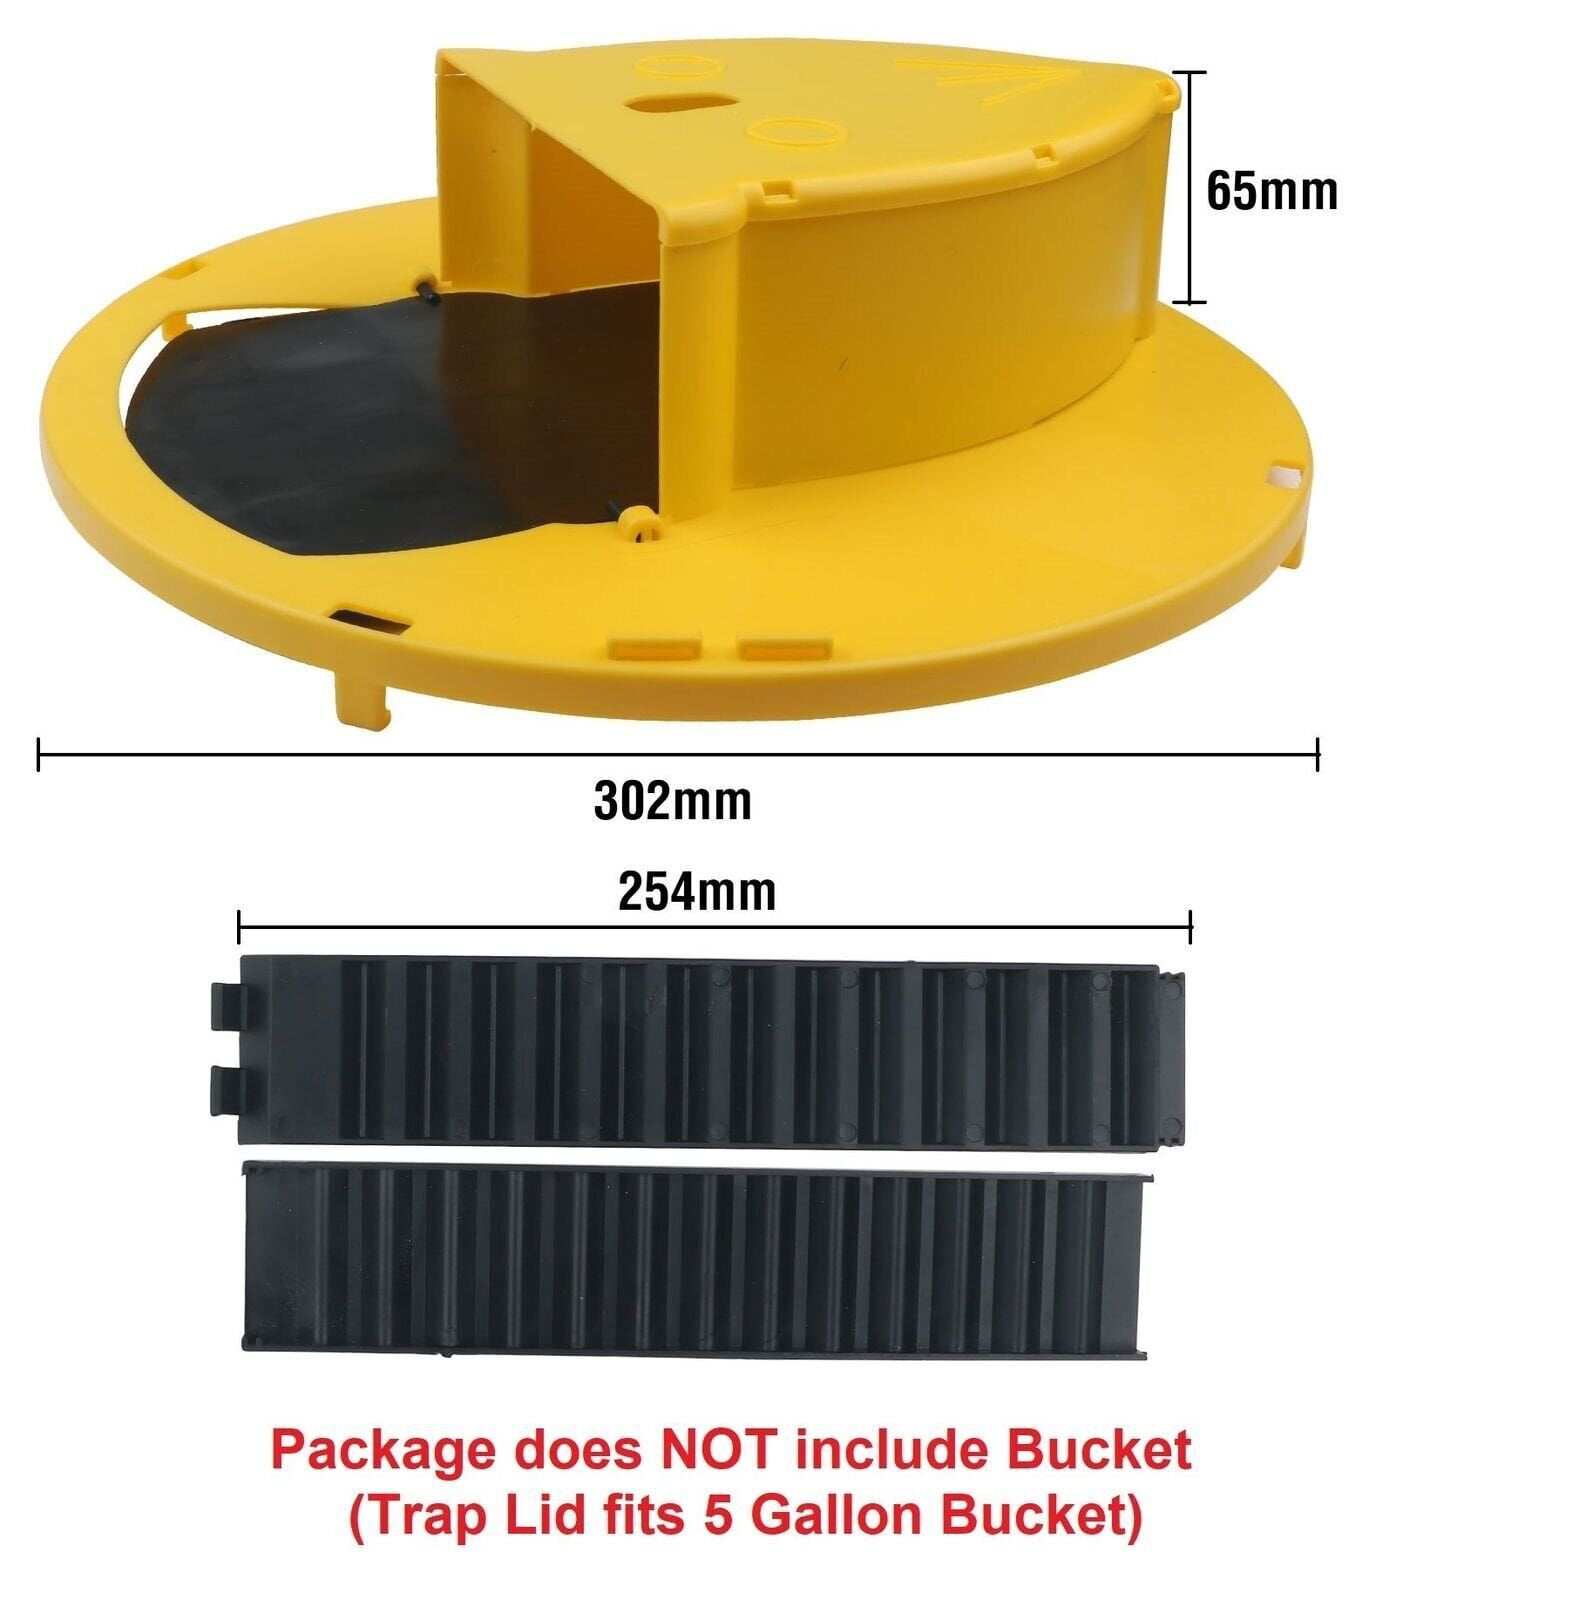 2 PACK Slide Bucket Lid Mouse Rat Trap Bucket Mousetrap Catcher FREE  SHIPPING US